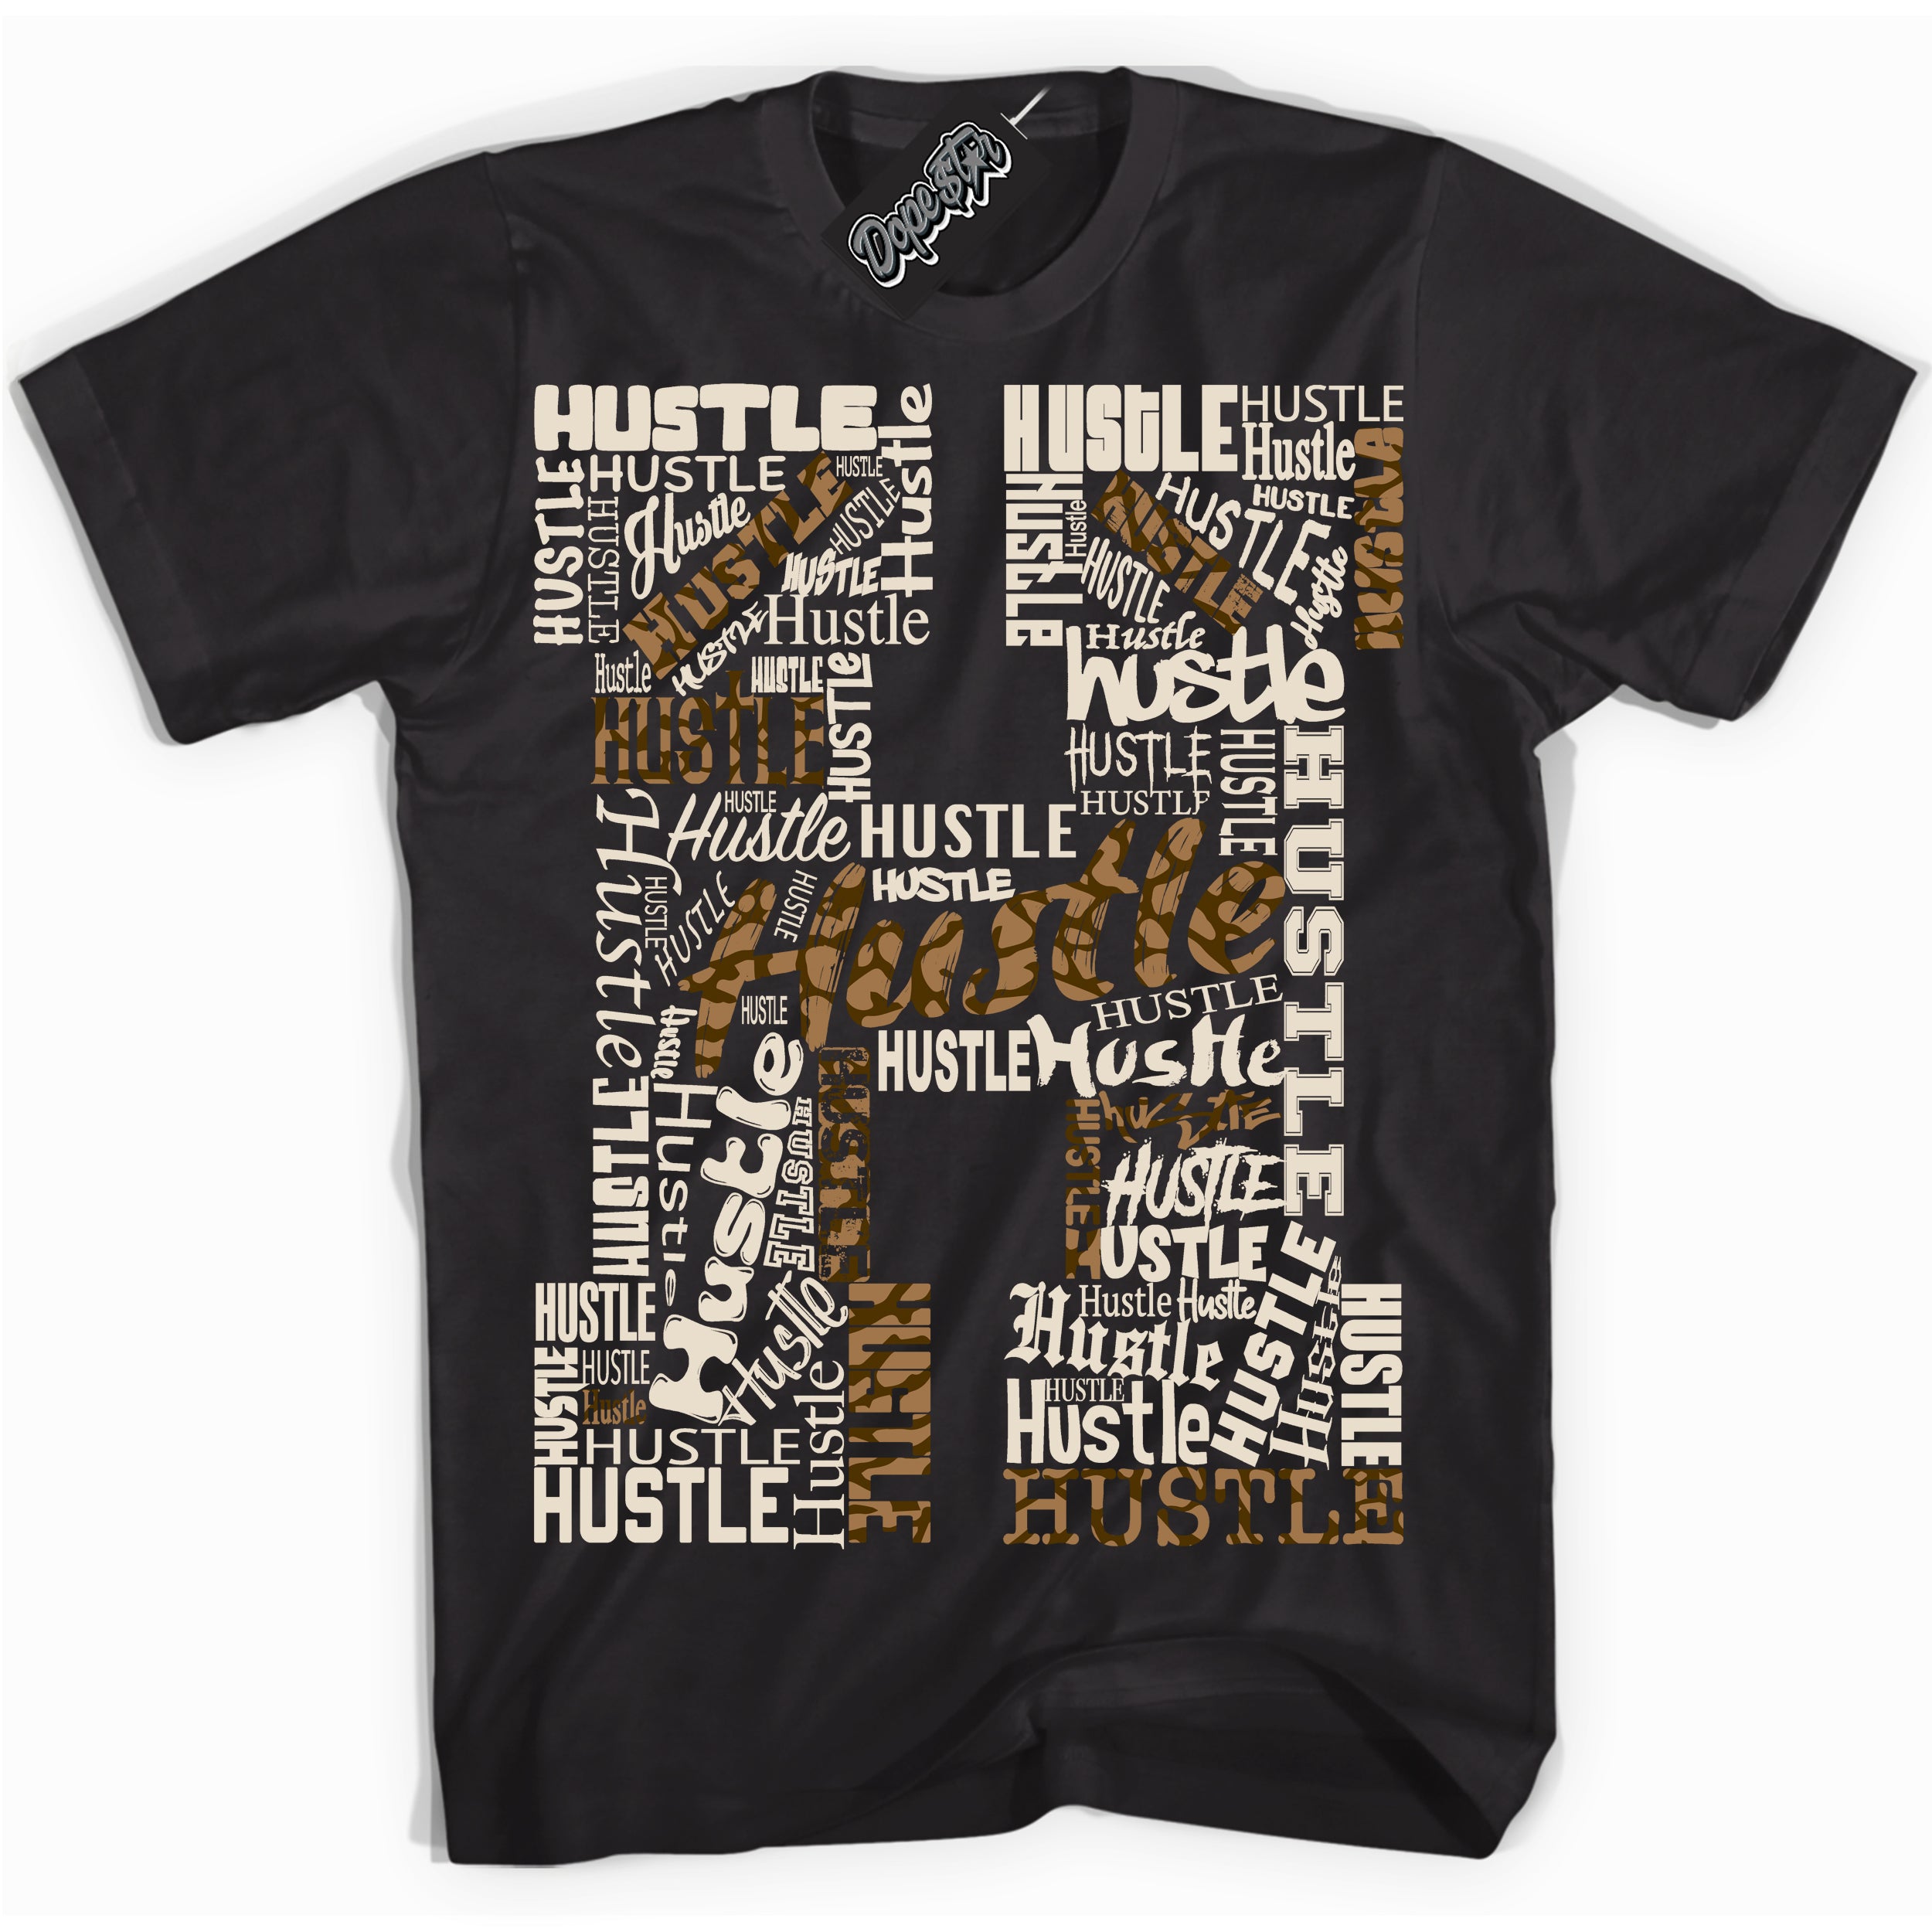 Cool Black graphic tee with “ Hustle H ” design, that perfectly matches Palomino 3s sneakers 